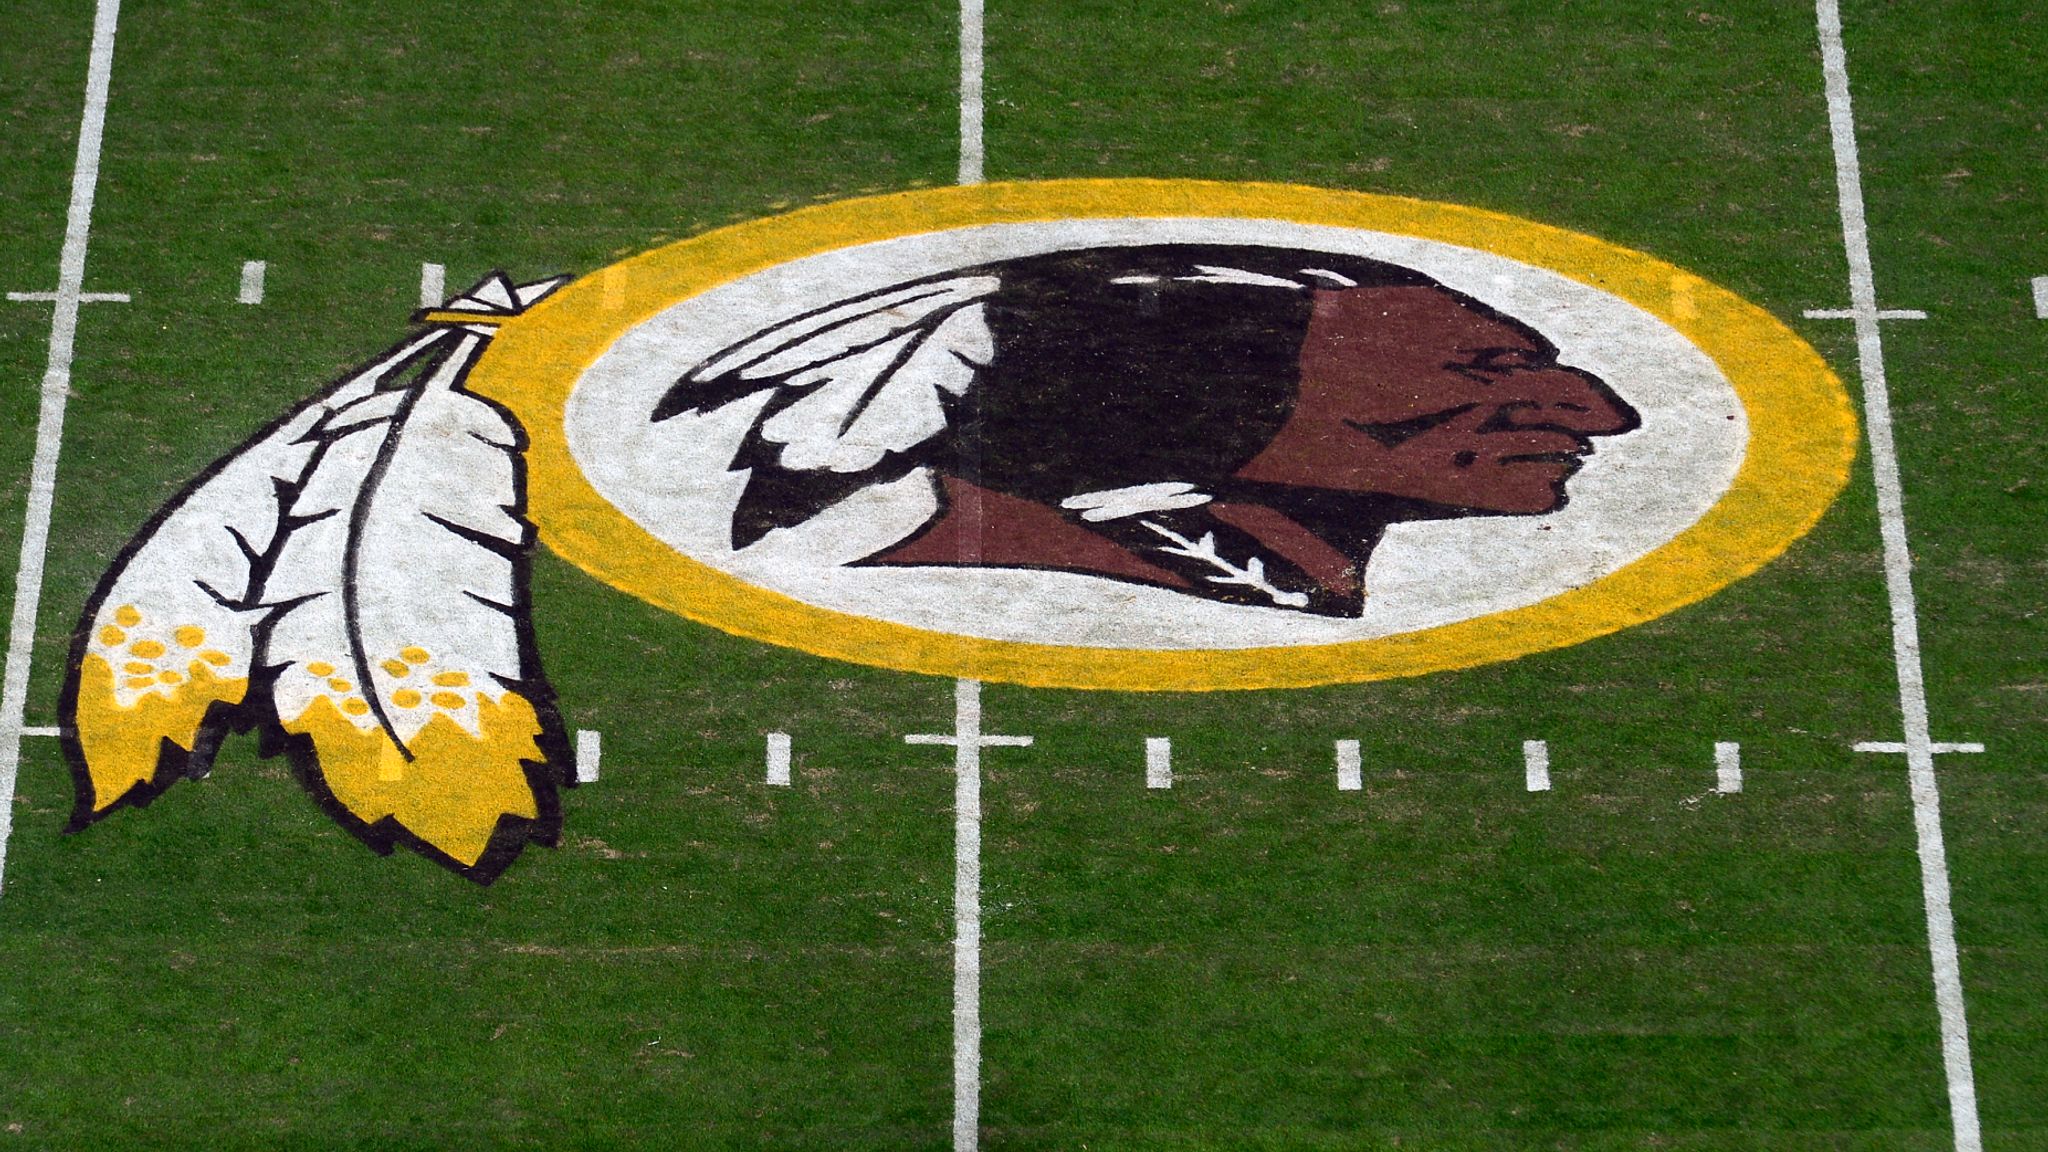 removes products with Washington Redskins logo, NFL News